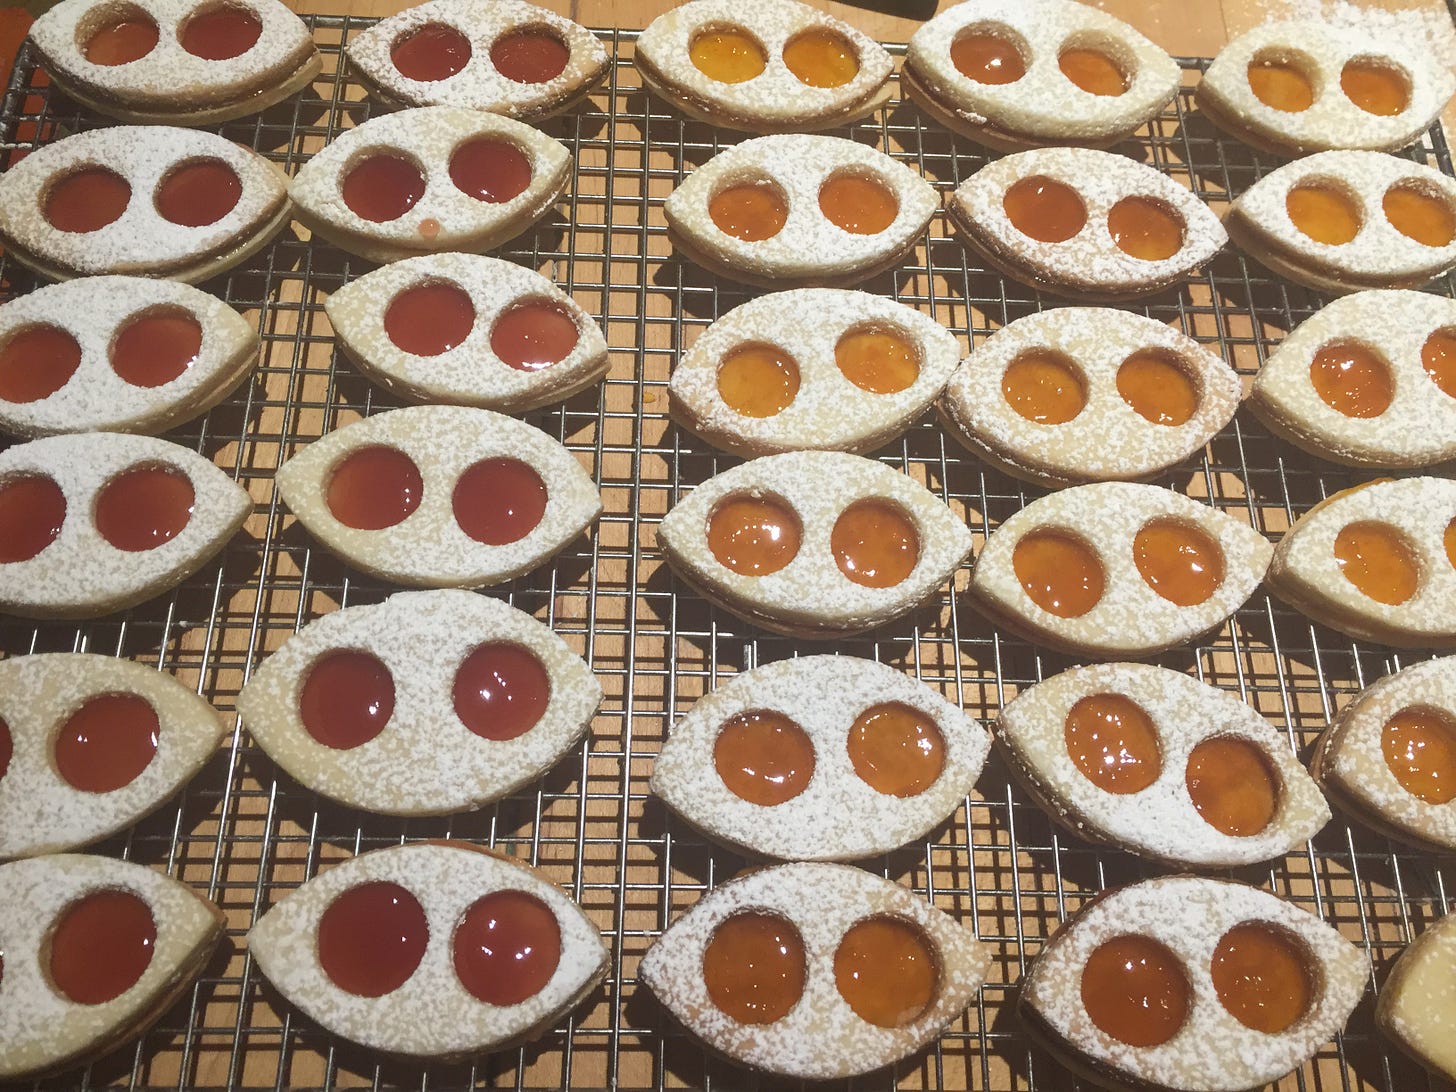 Many rows of teardrop shaped sandwich cookies. Each cookie has two round holes cut out of it, through which you can see the jam filling. Half are filled with a deep red raspberry jam; the other half with golden apricot jam.